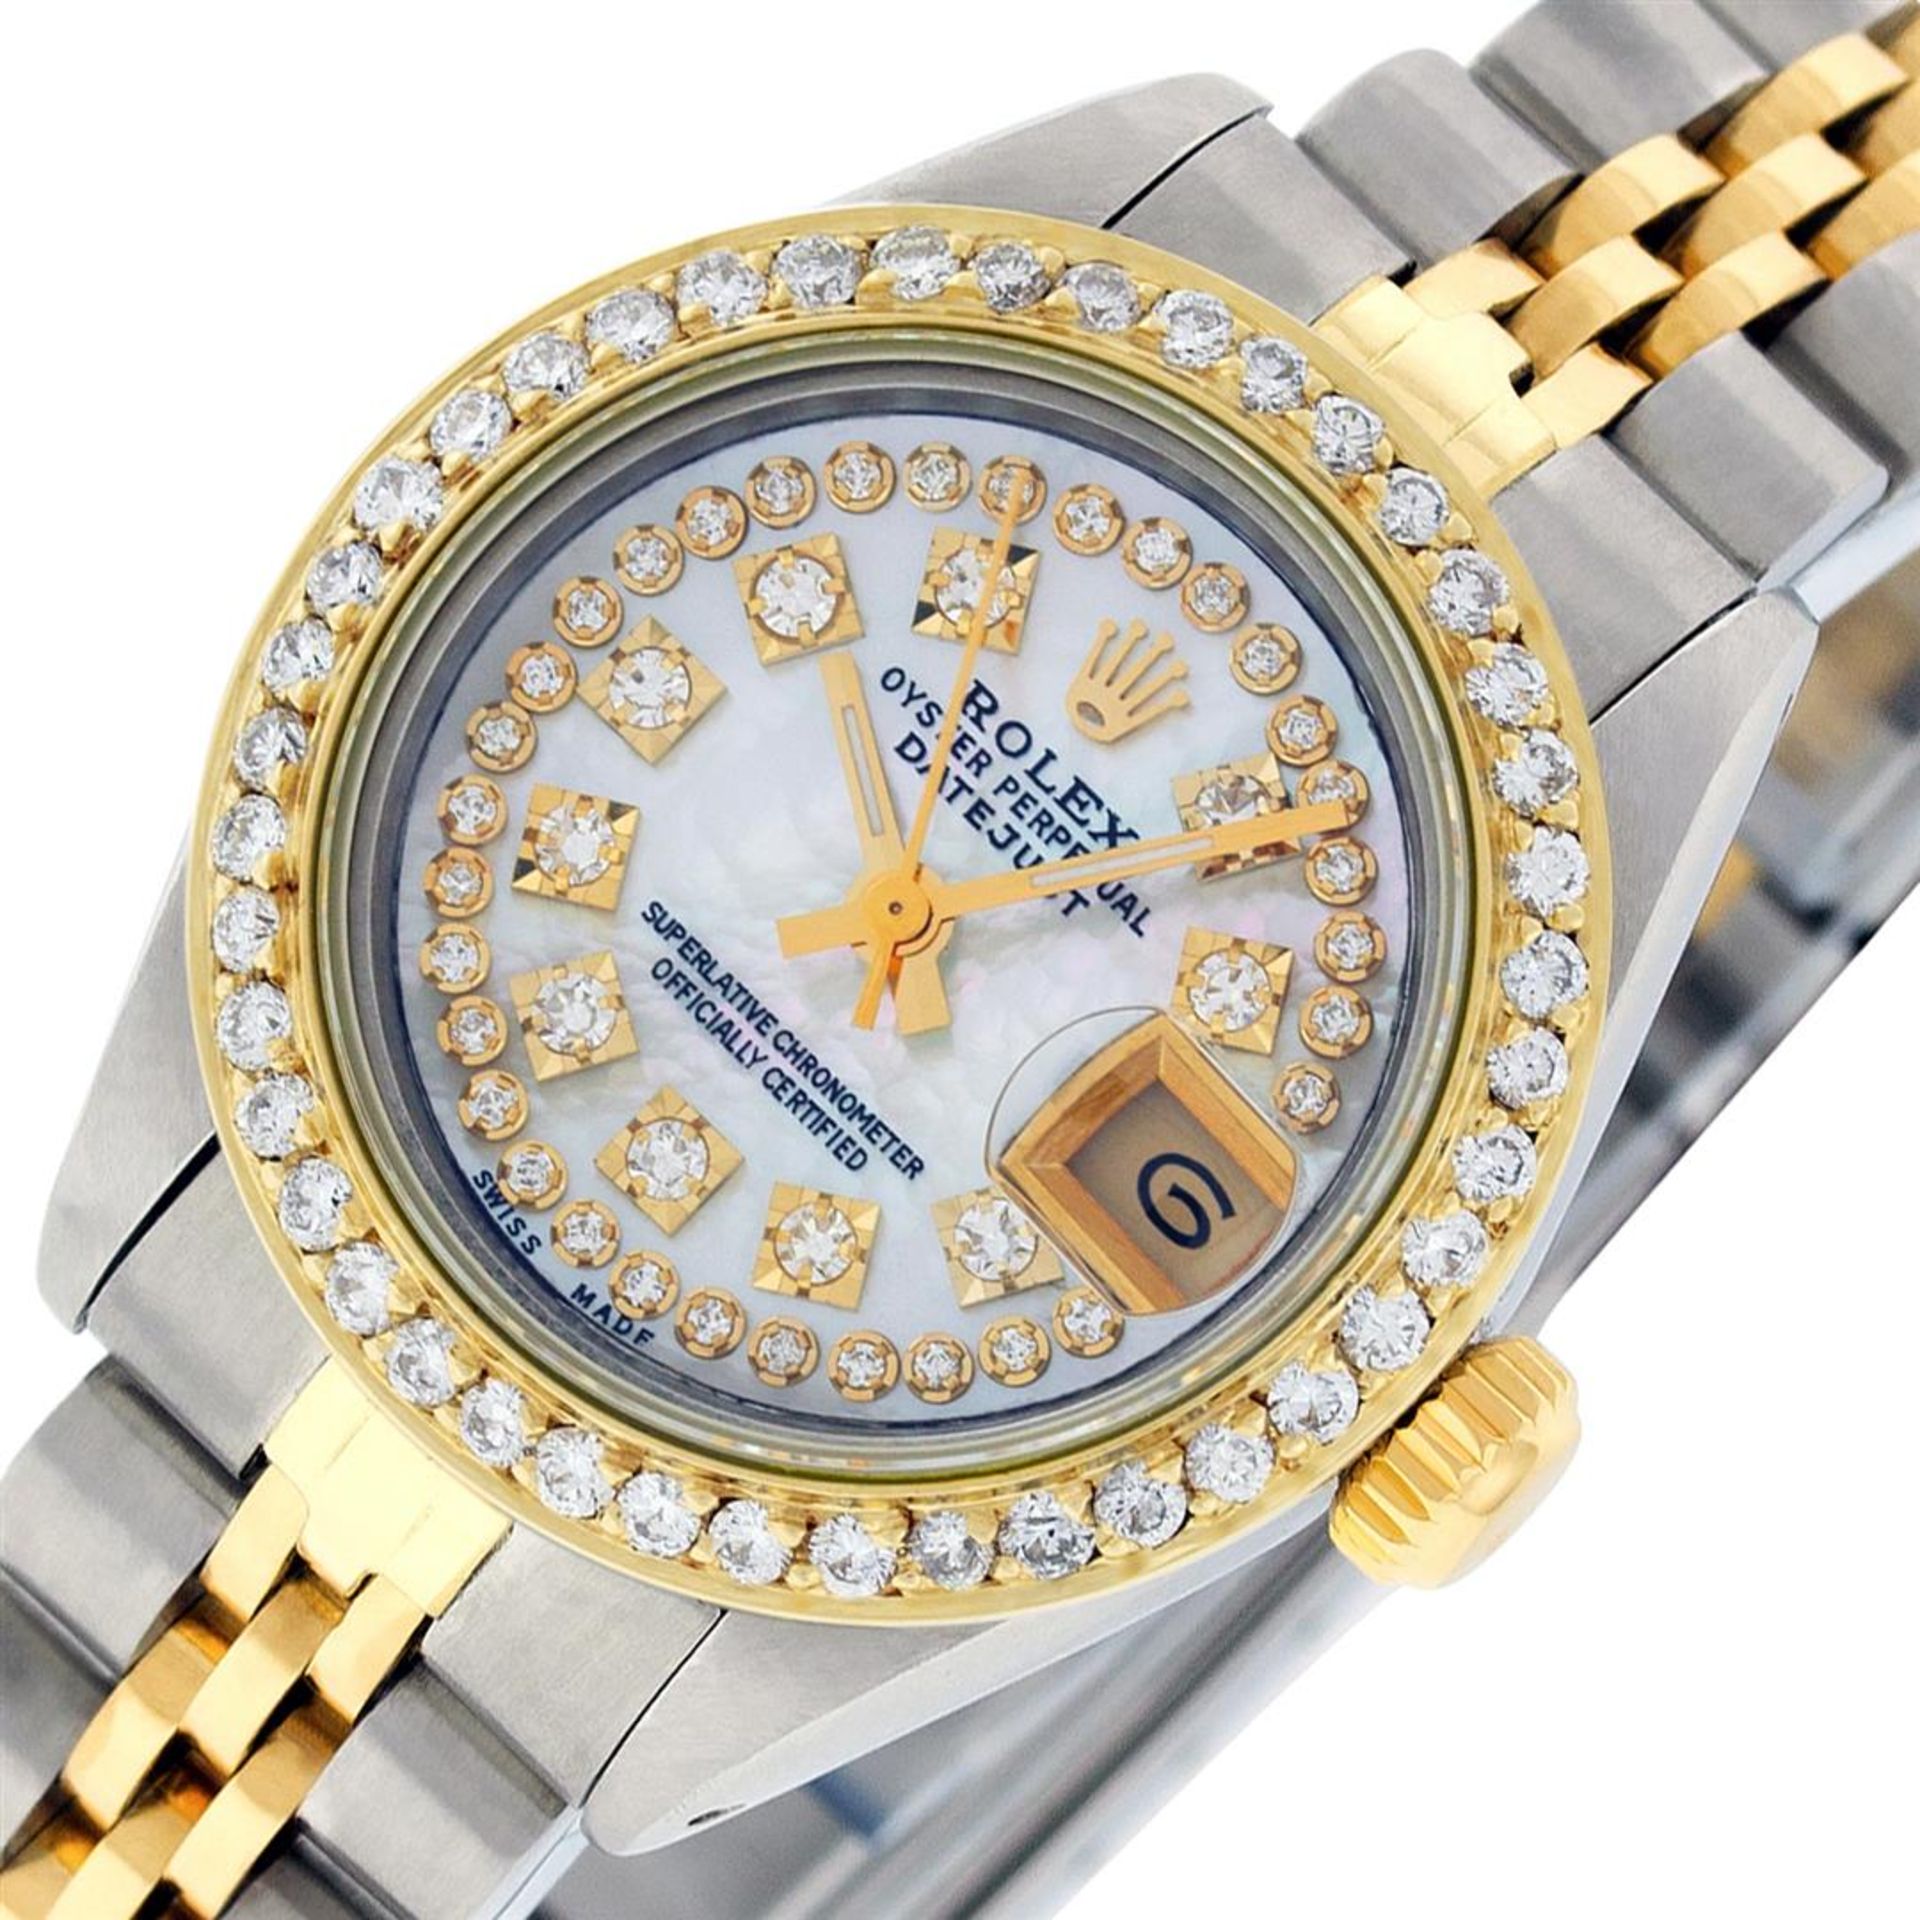 Rolex Ladies 2 Tone Mother Of Pearl String Diamond Datejust Wristwatch - Image 2 of 9